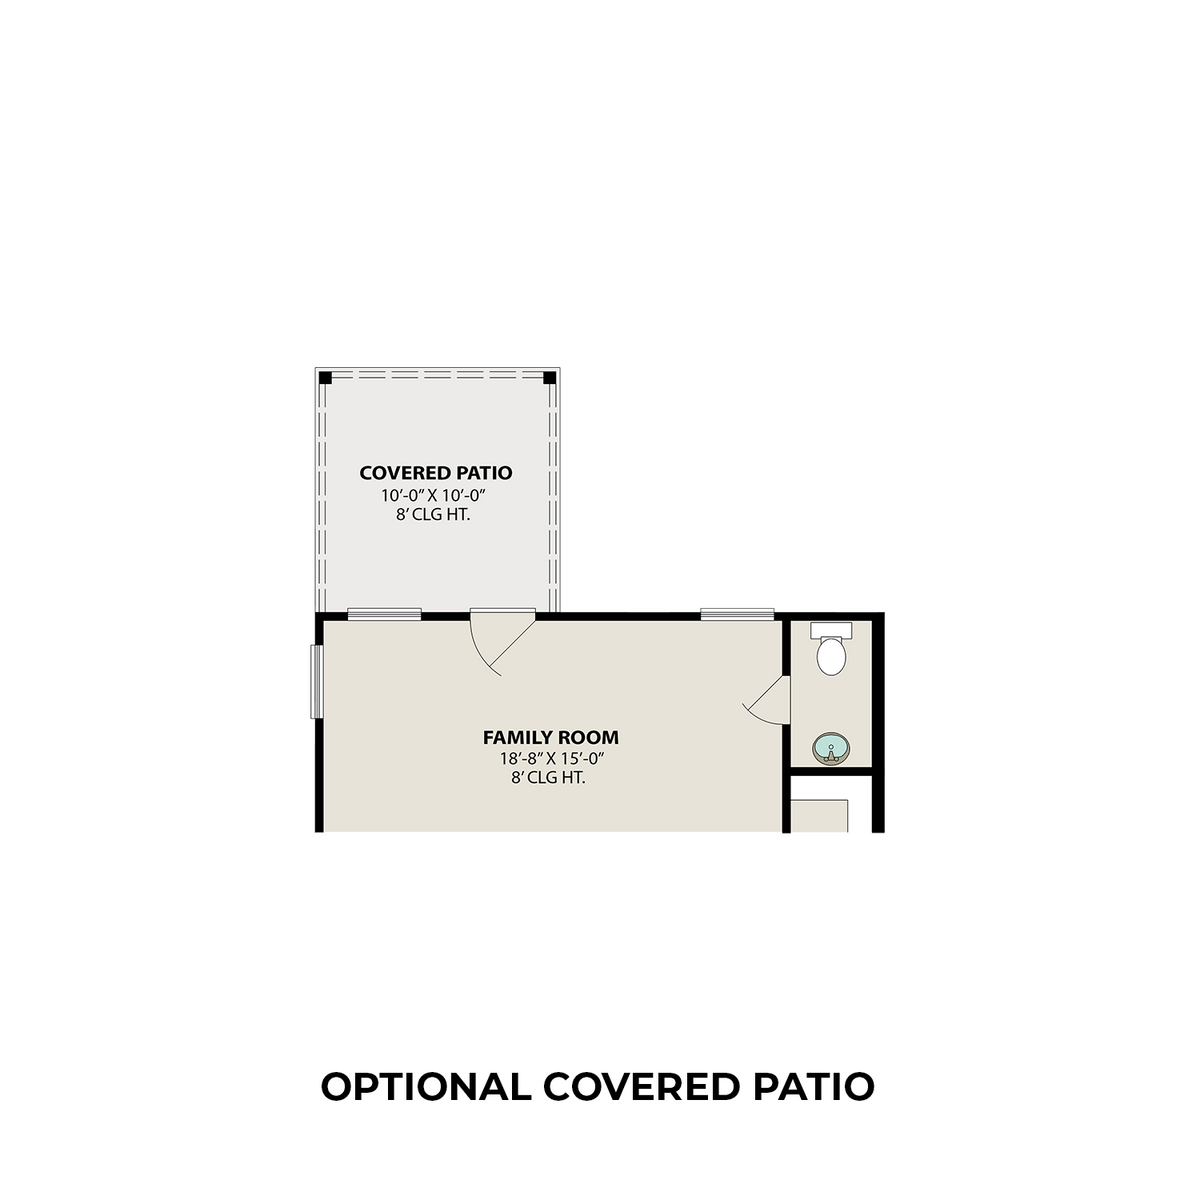 3 - The Lily B floor plan layout for 5263 Shallowhurst Lane in Davidson Homes' Haven at Kieth Harrow community.